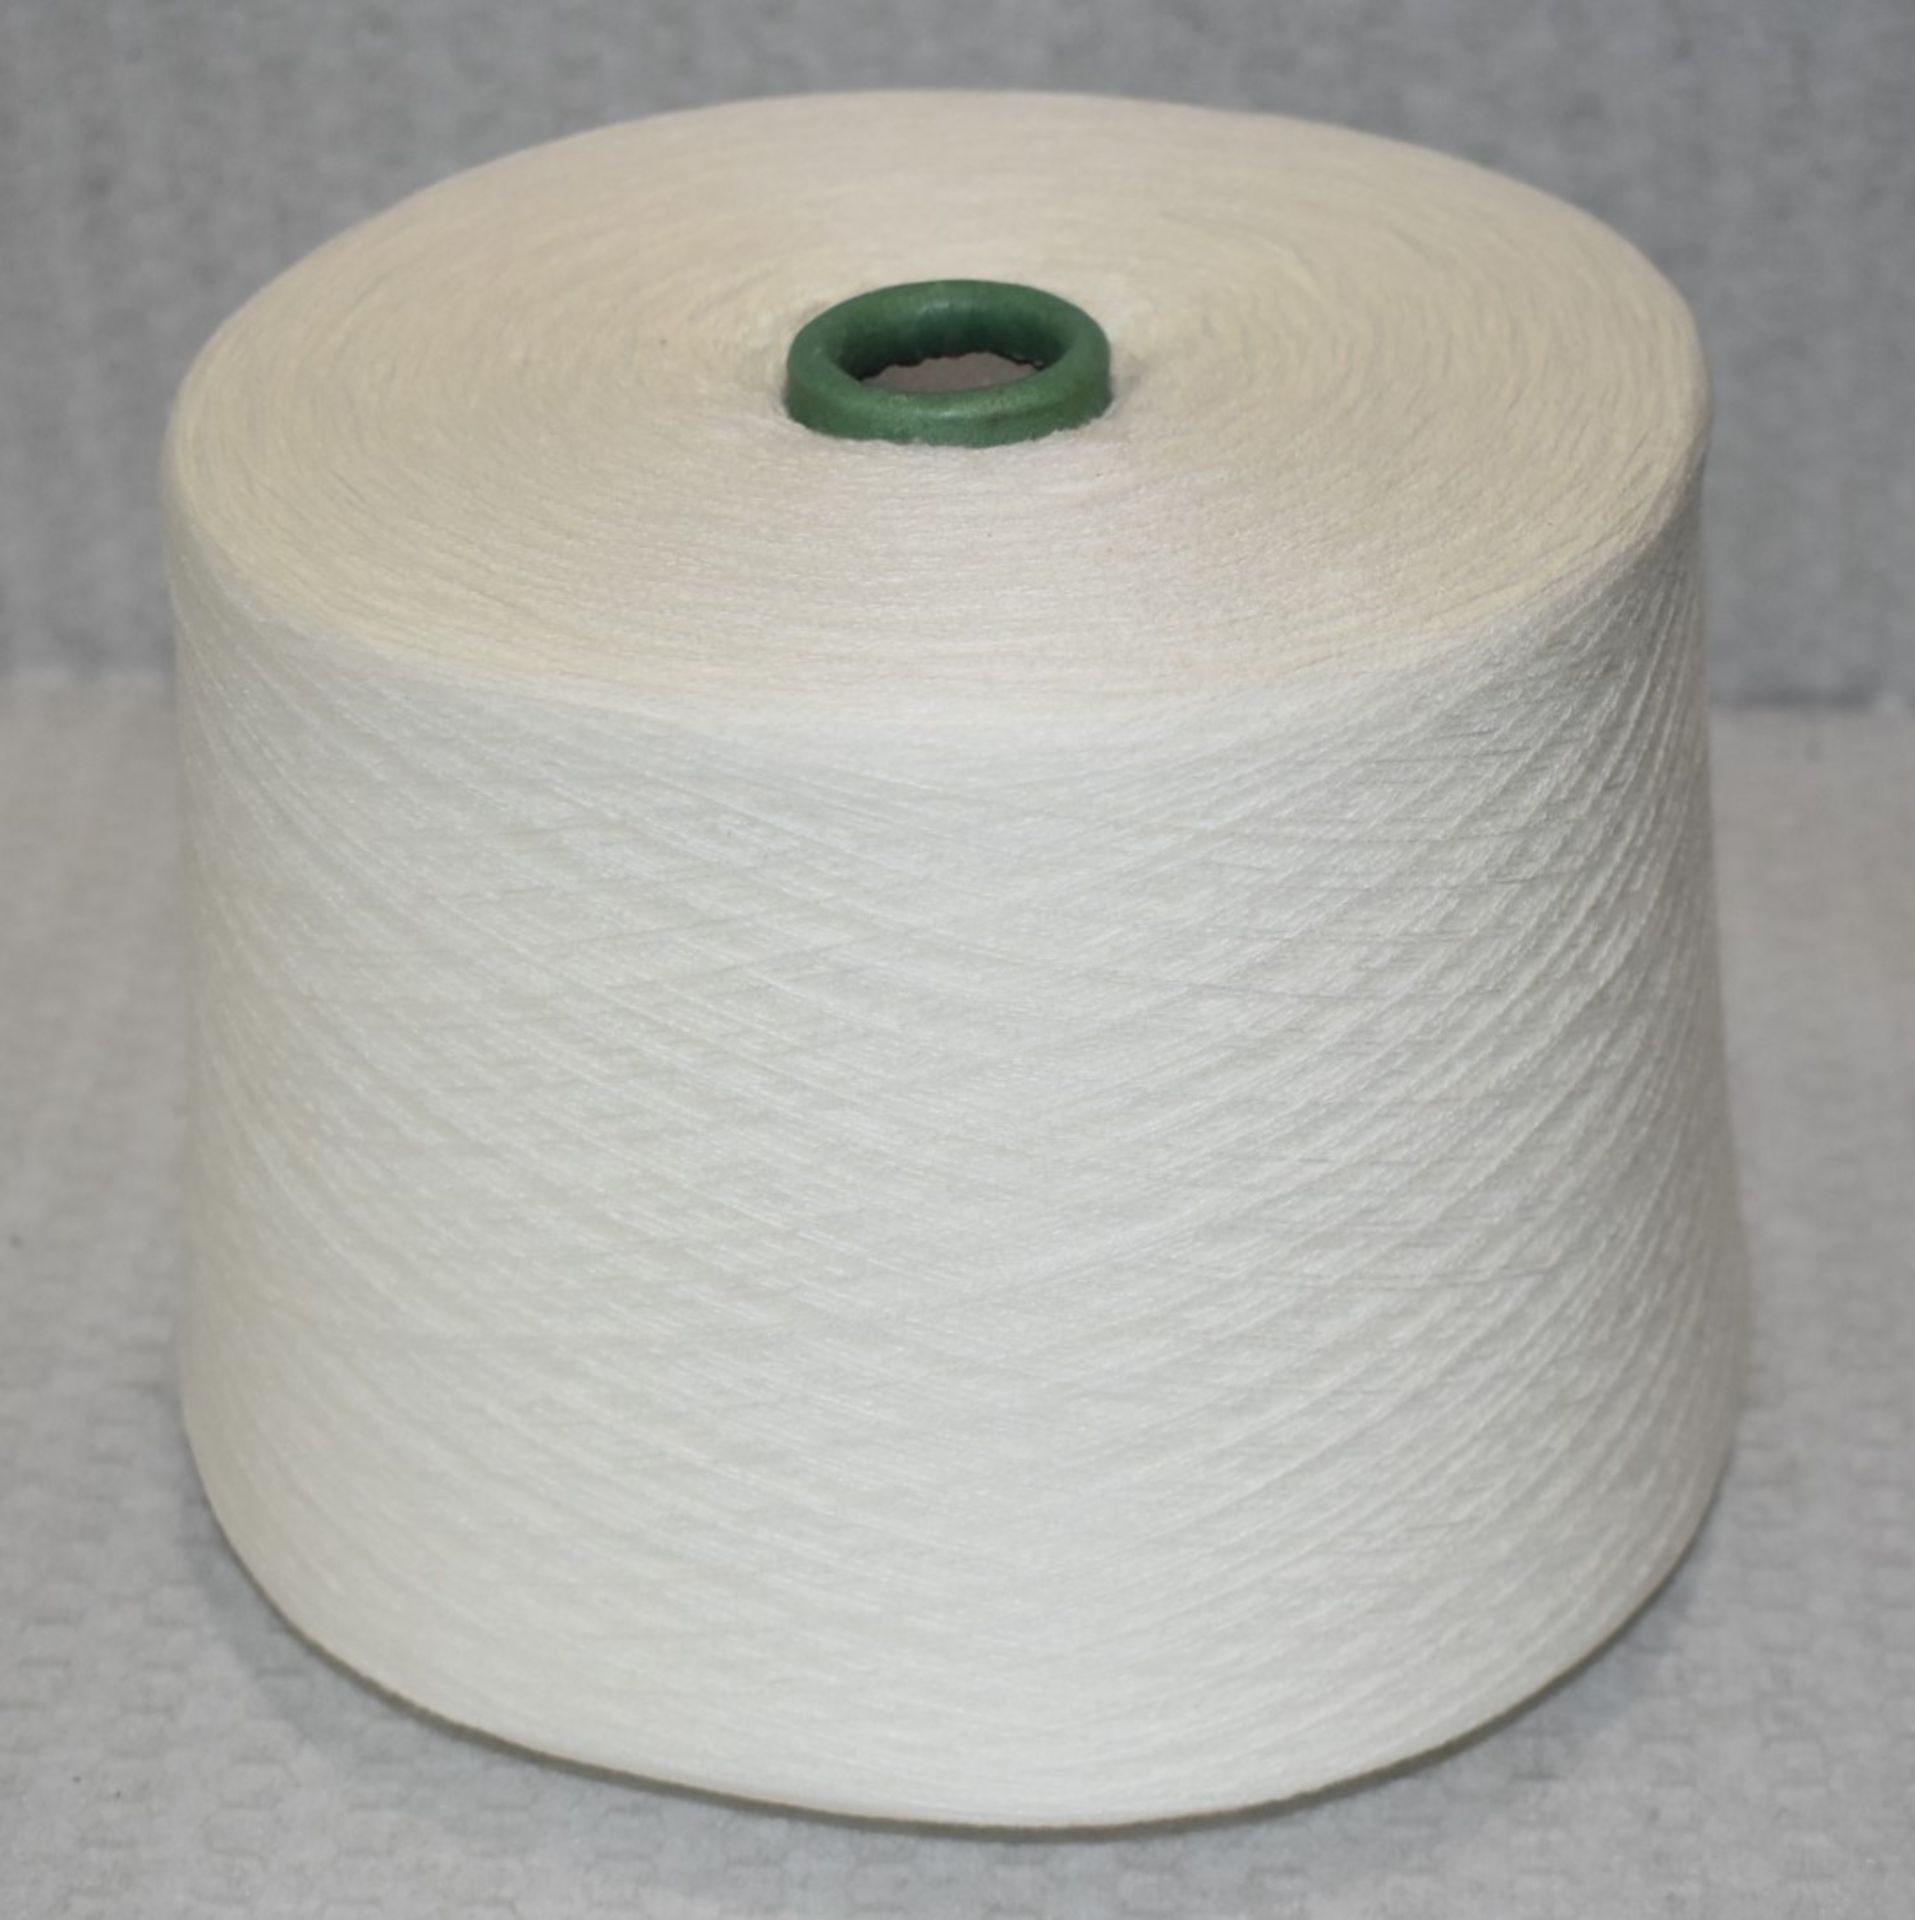 6 x Cones of 28/2 H.B 100% Acrylic Knitting Yarn - Colour: Ivory - Approx Weight: 1,300g - New Stock - Image 2 of 10